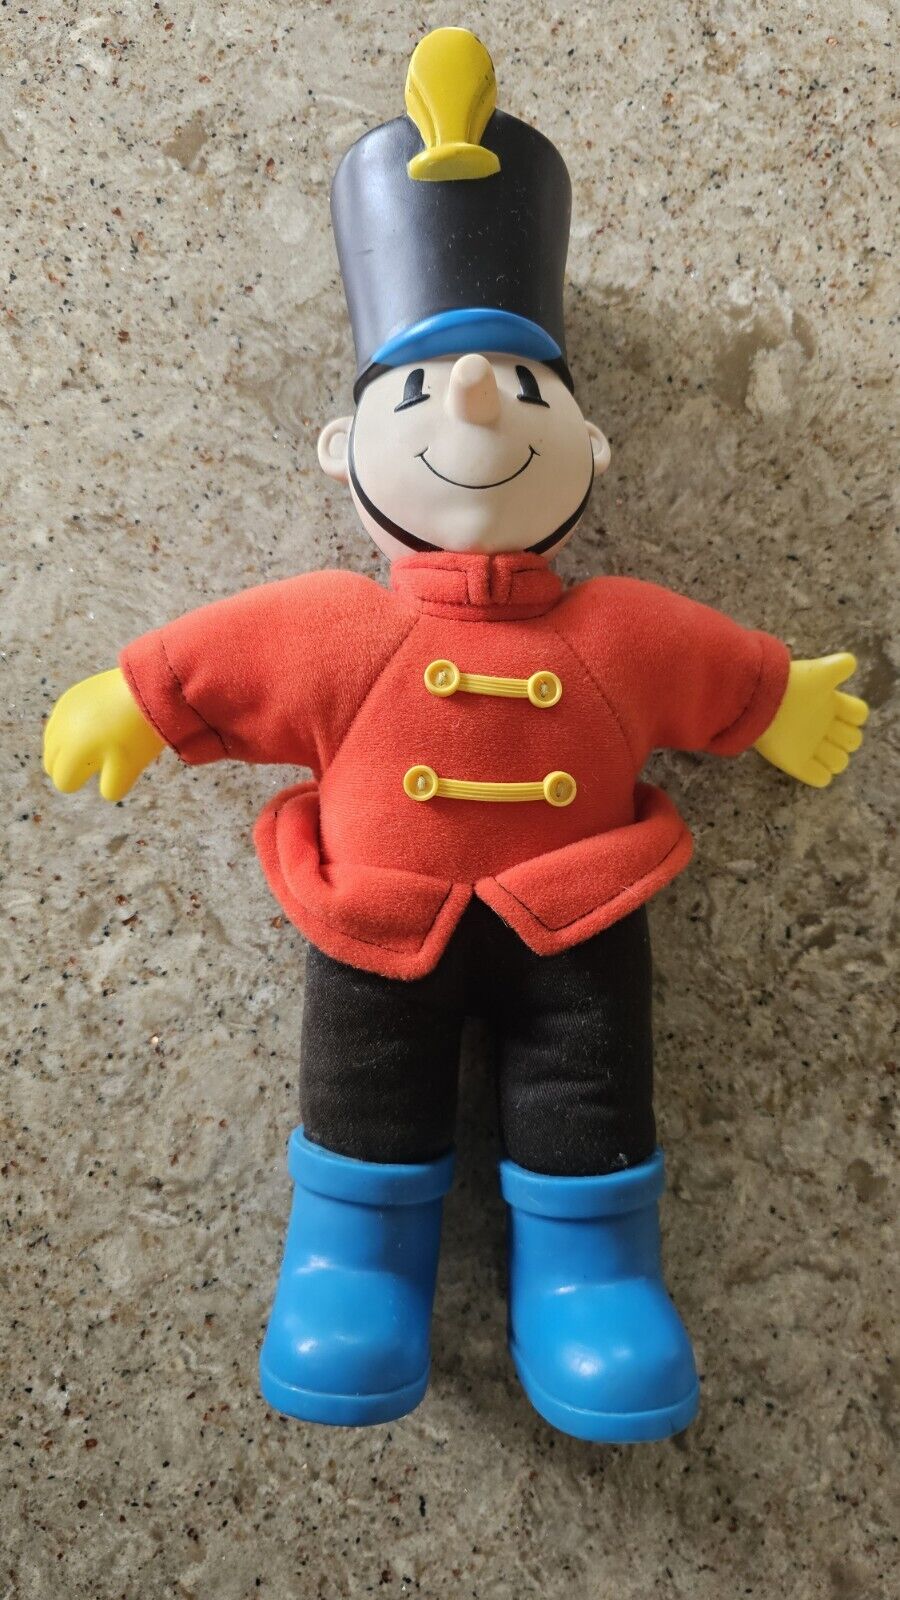 Kay Bee KB Toys Store Mascot Soldier Plush Doll 14” Vintage 90s Toy 